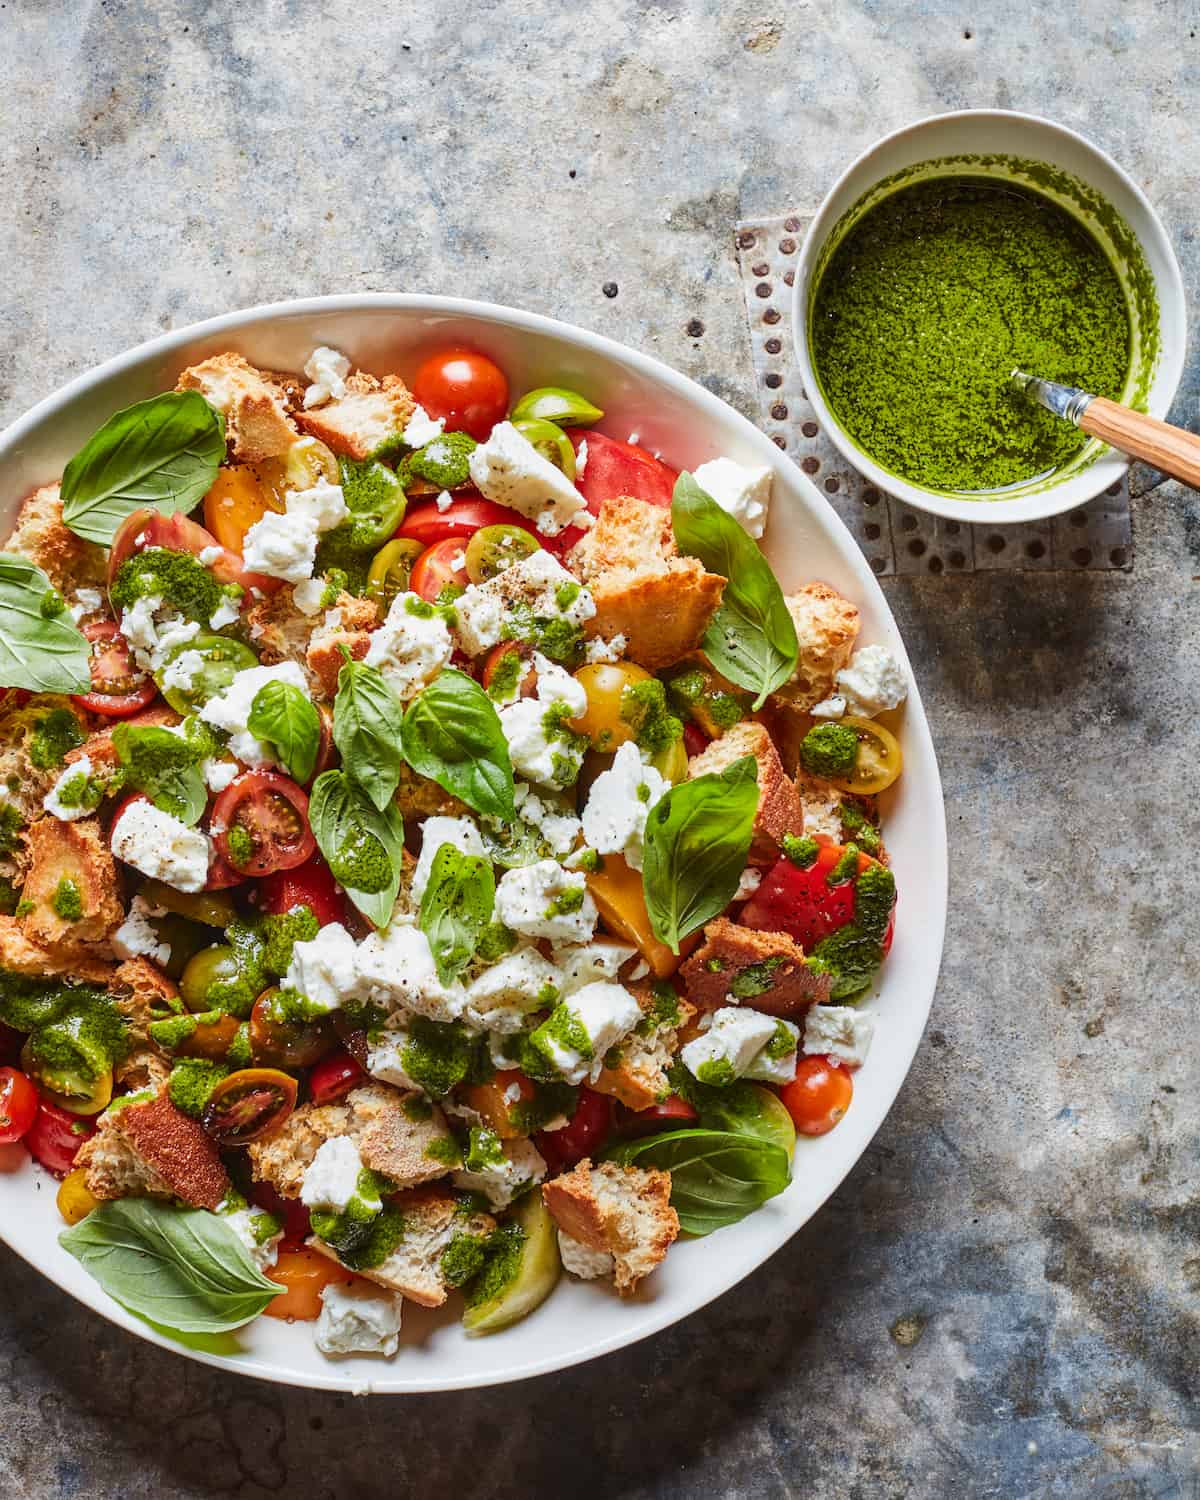 A giant salad bowl filled with croutons, chucks of mozzarella, halved tomatoes, and basil sitting next to a bowl of basil vin.